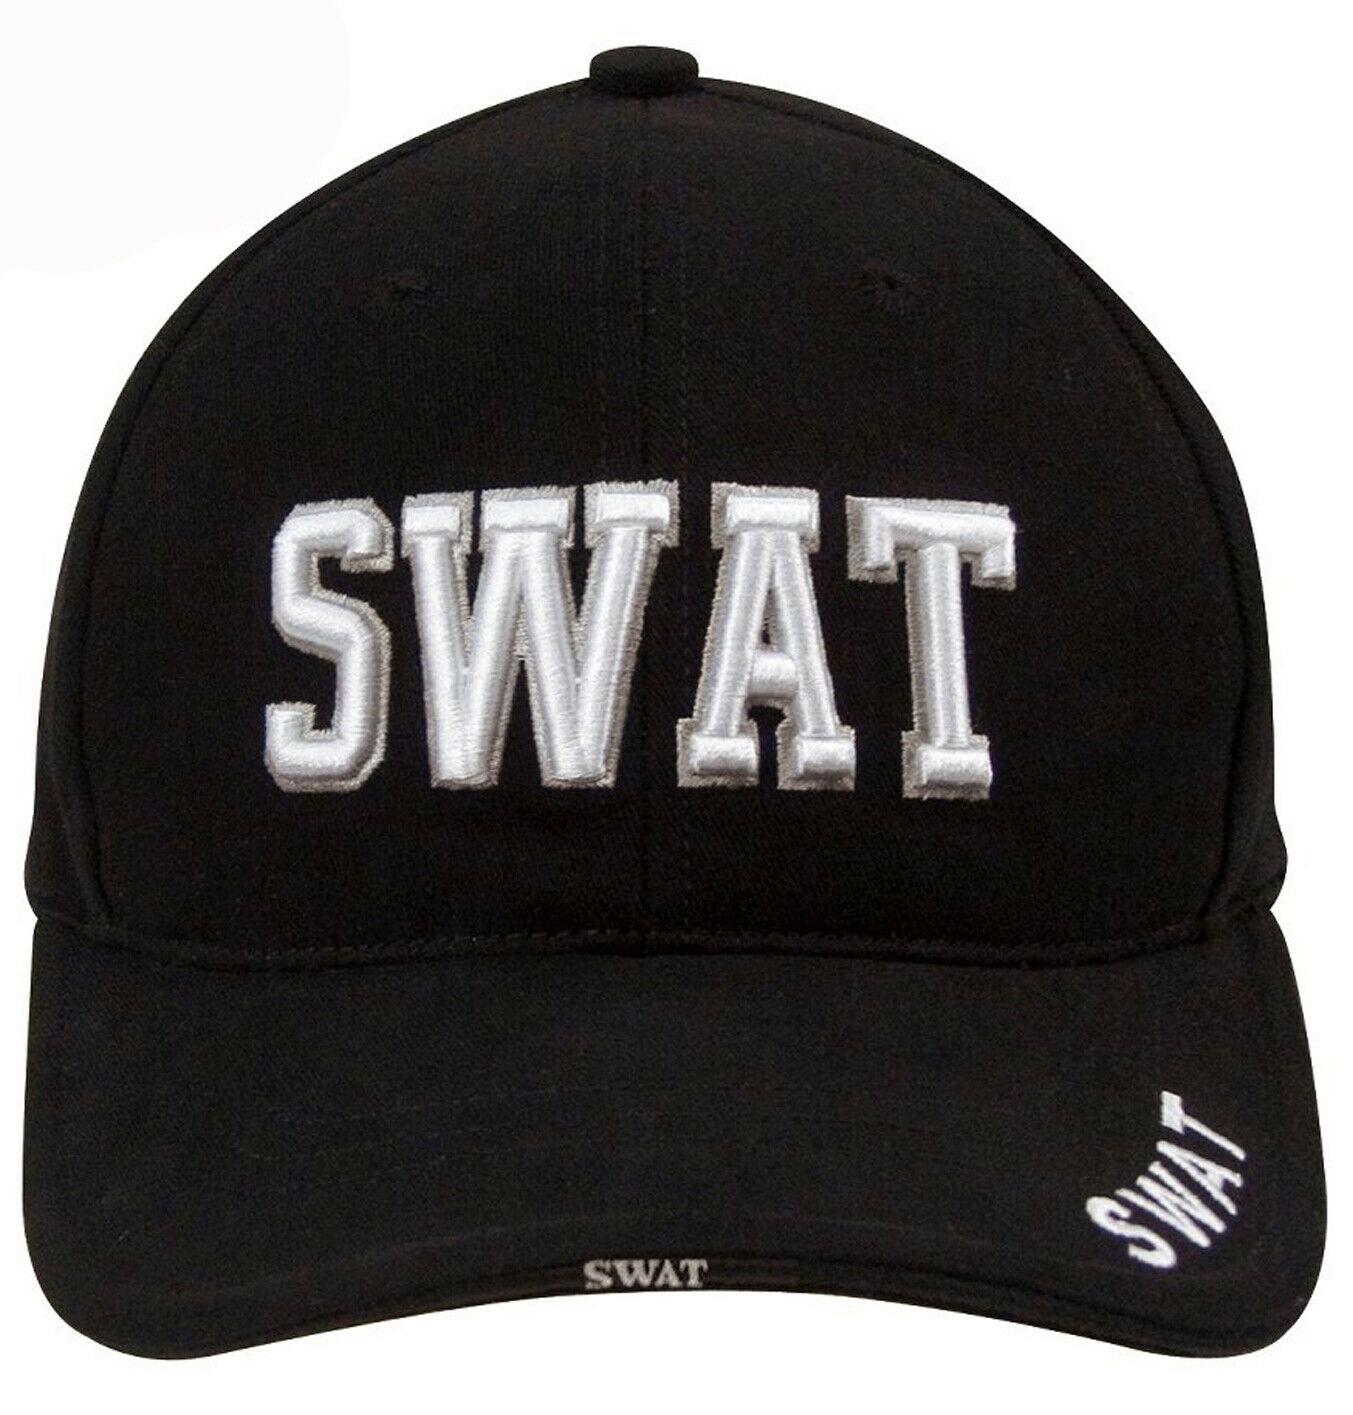 Rothco Deluxe Police SWAT Low Profile Cap - Black